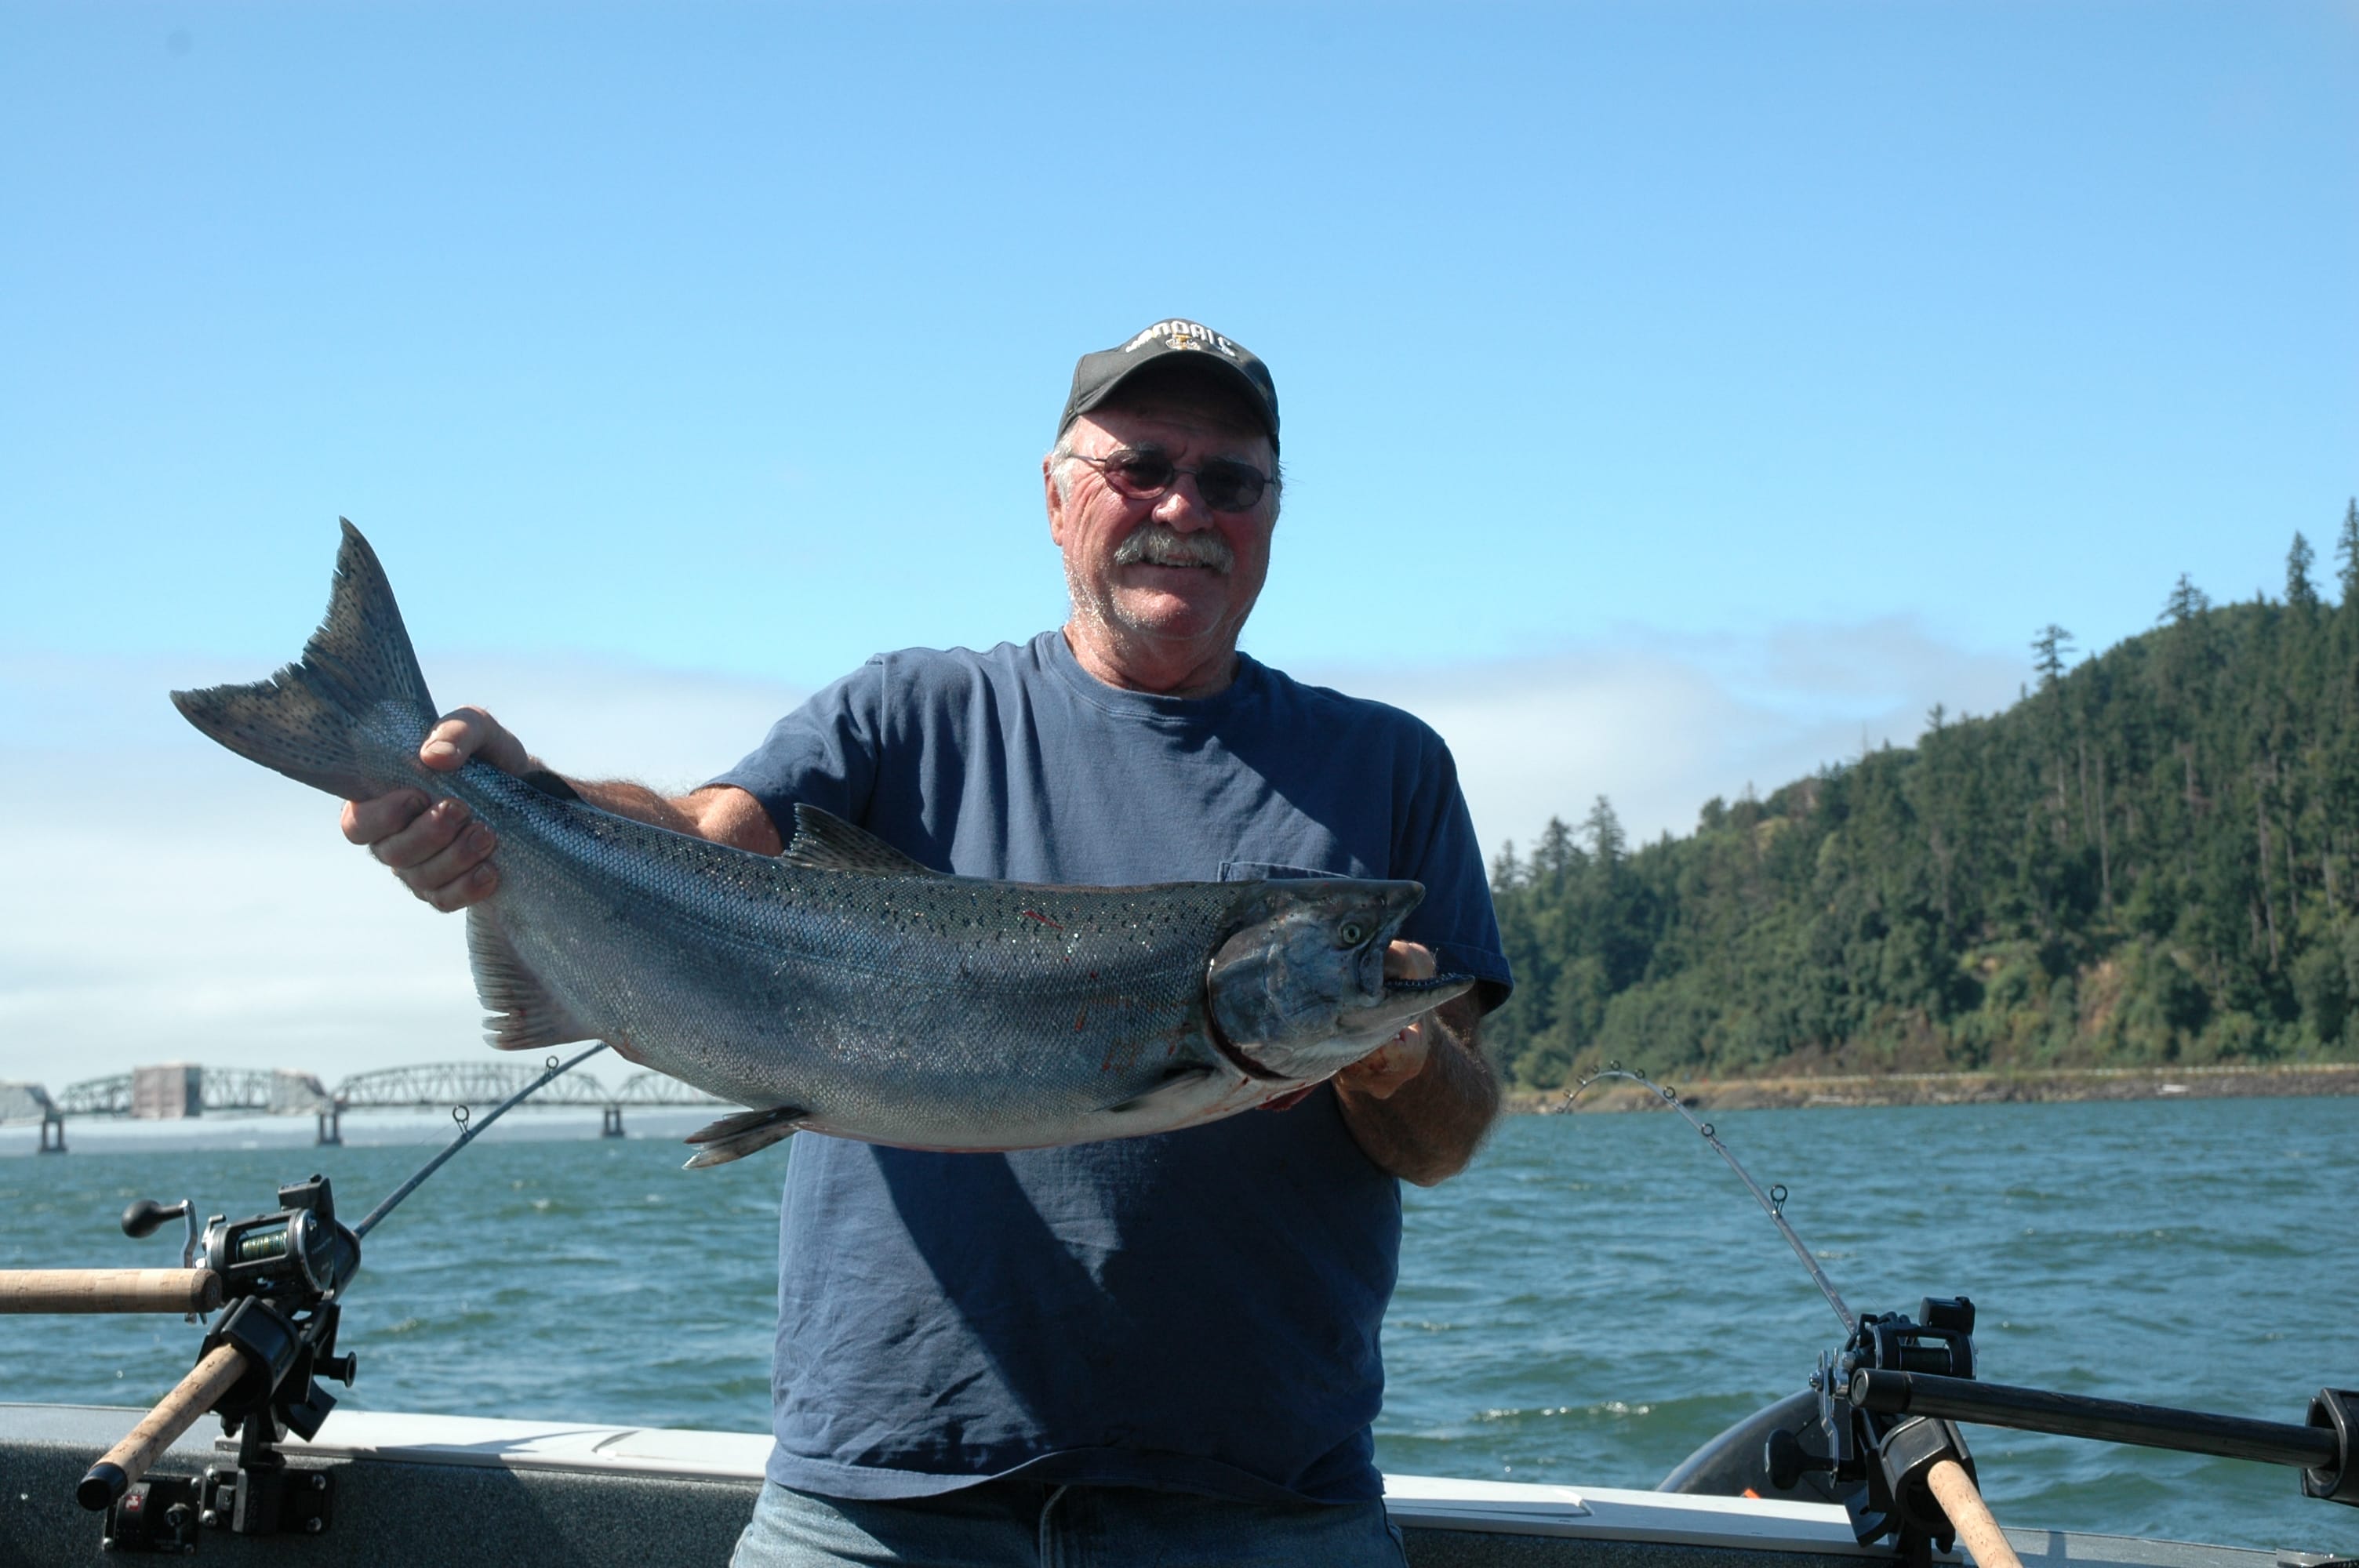 Gary Baker of Olympia with a small fall chinook salmon caught near the Astoria Bridge at Buoy 10.